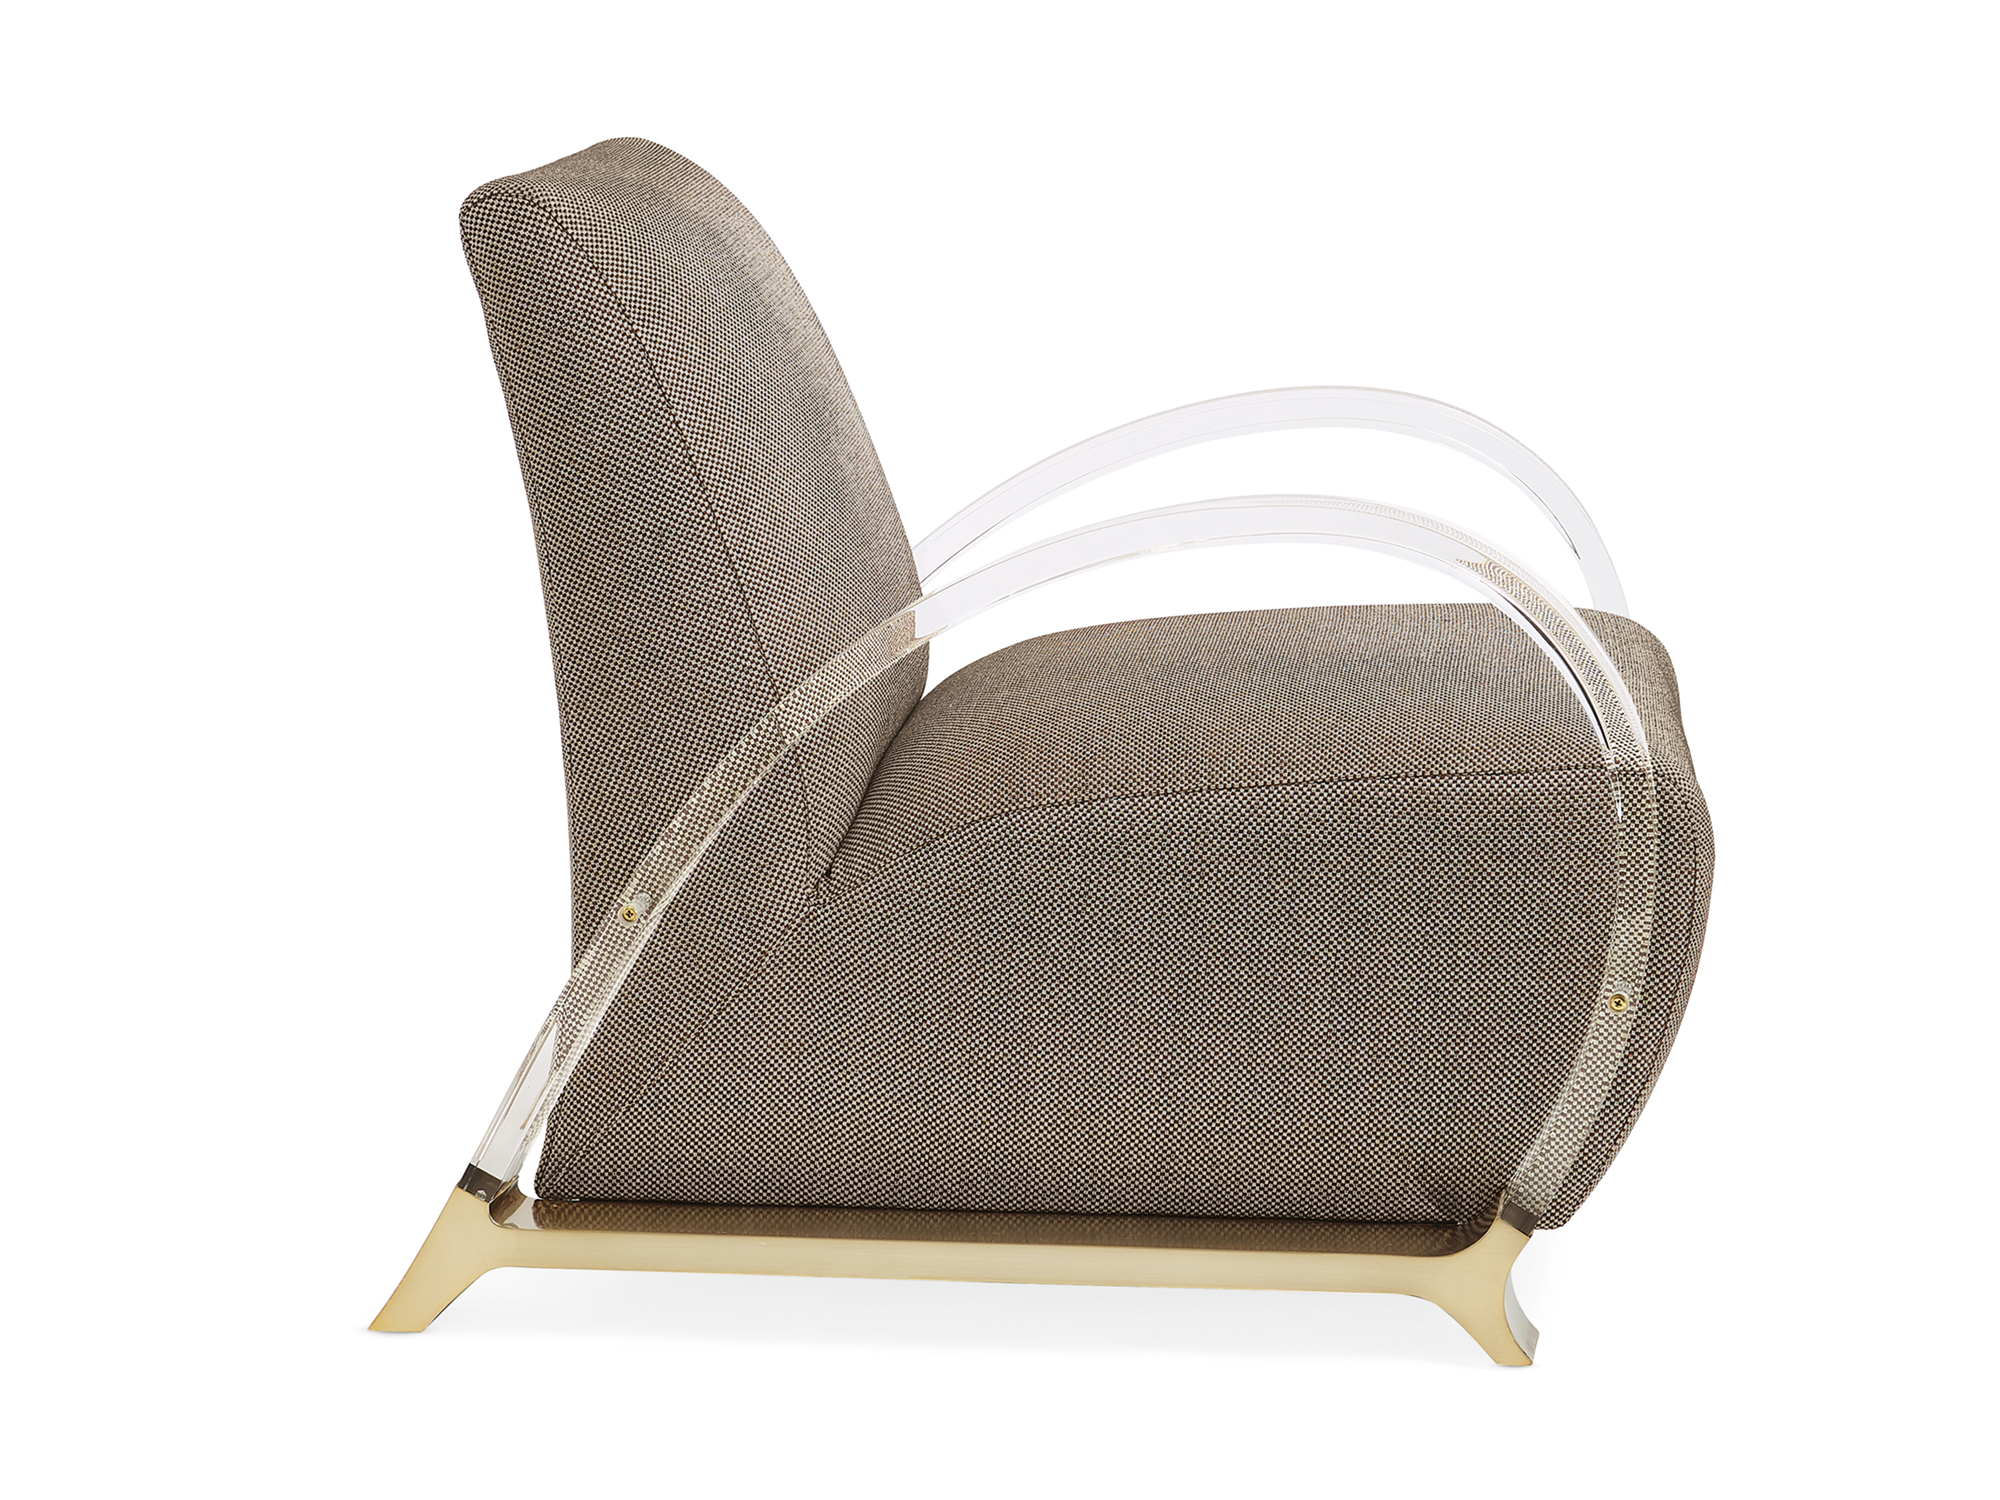 Desmond Arch Support Chair in Champagne Gold - Euro Living Furniture